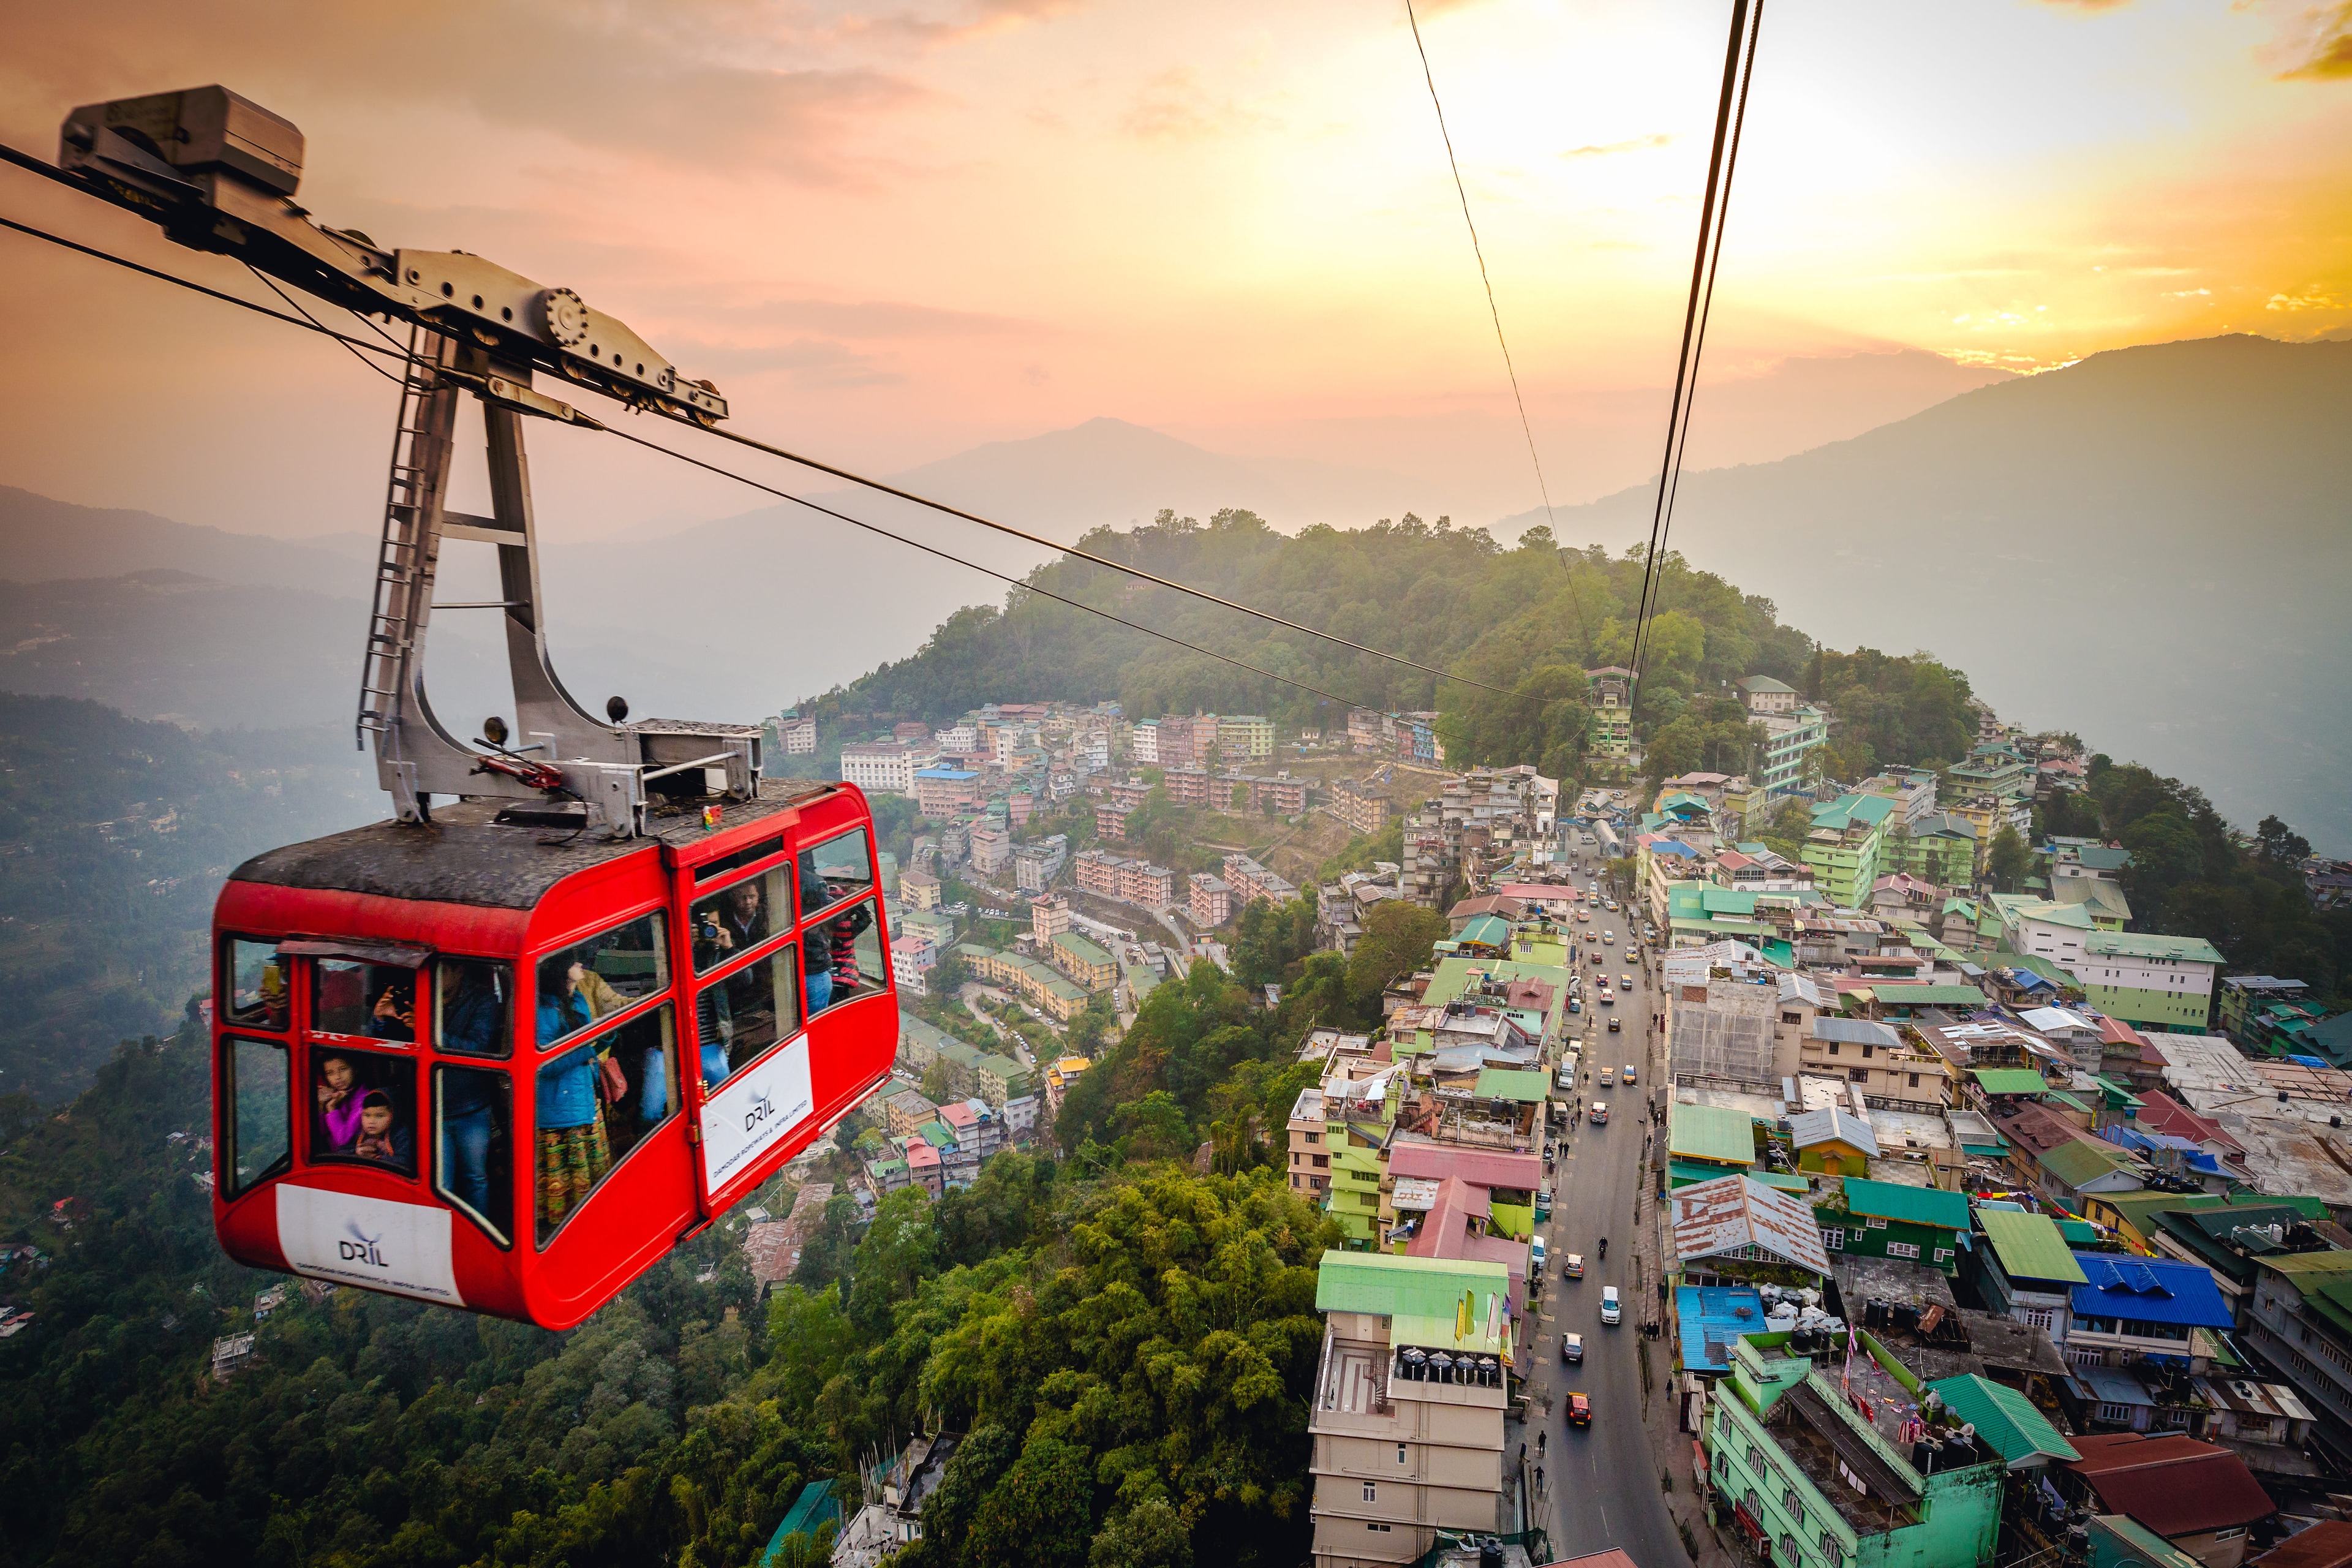 Things To Do in Gangtok: Experience a Vacation Like Never Before